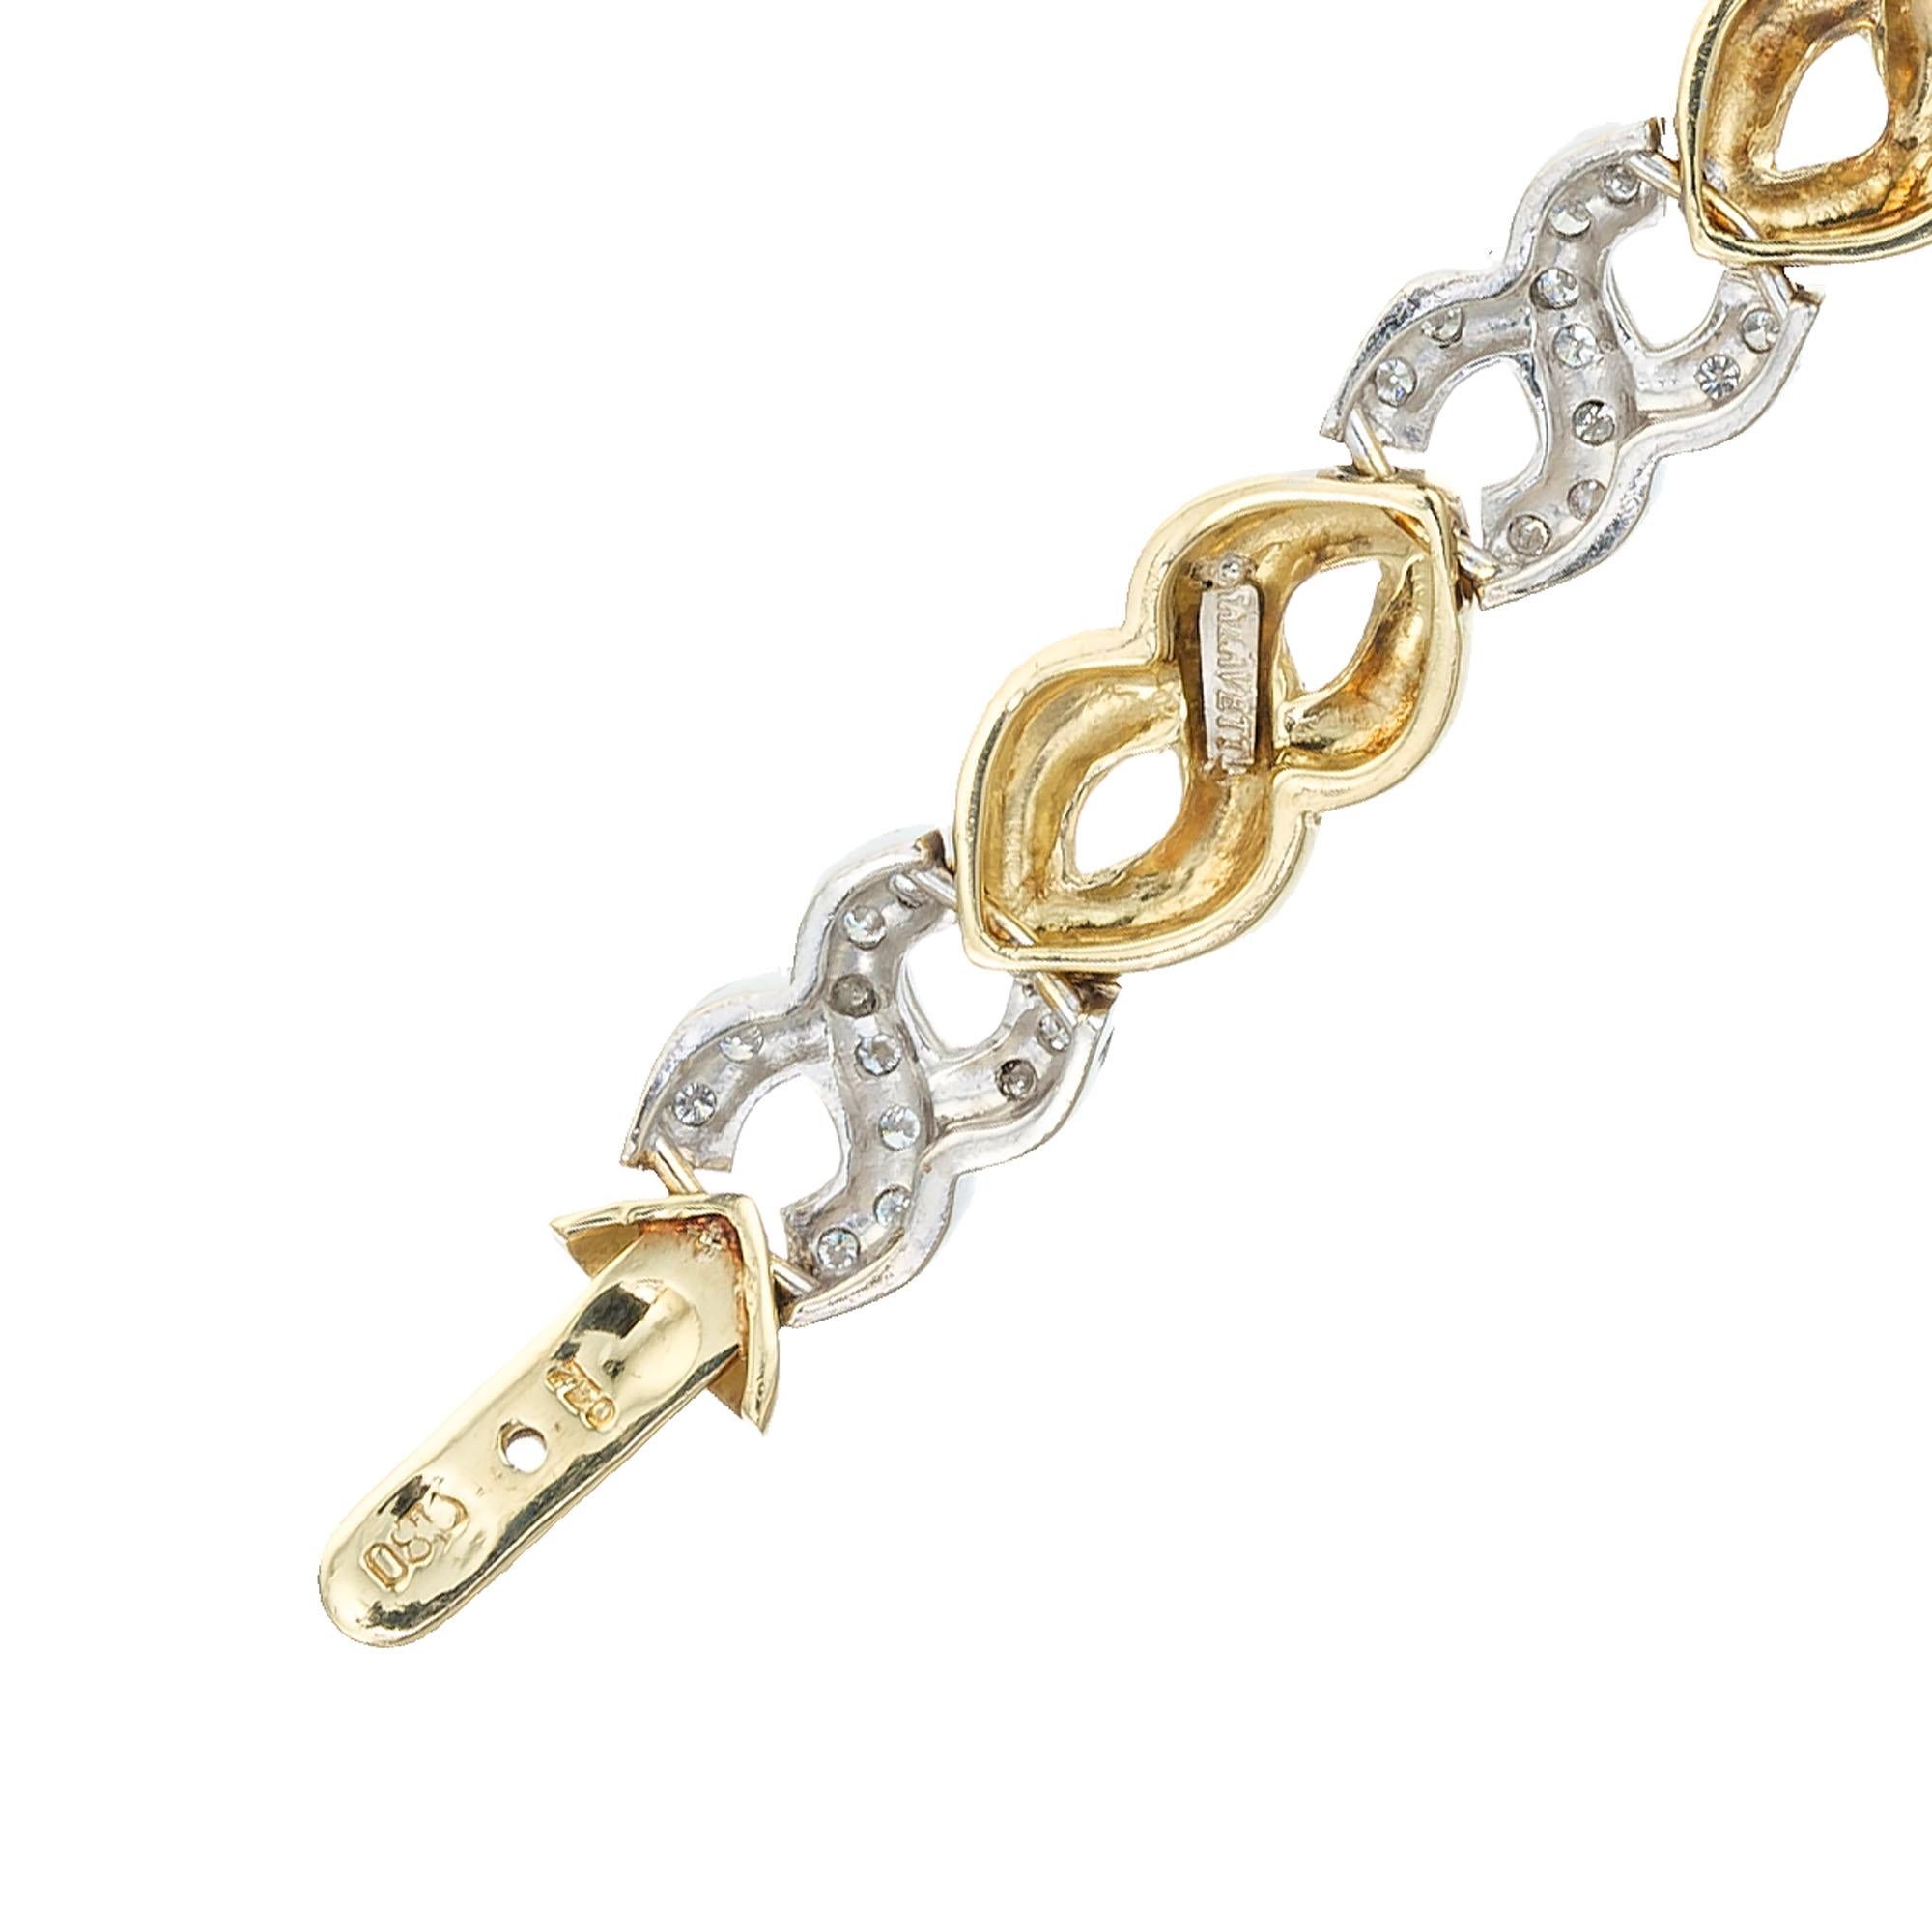 1.20 Carat Pave Diamond Yellow White Gold Swirl Link Bracelet In Good Condition For Sale In Stamford, CT